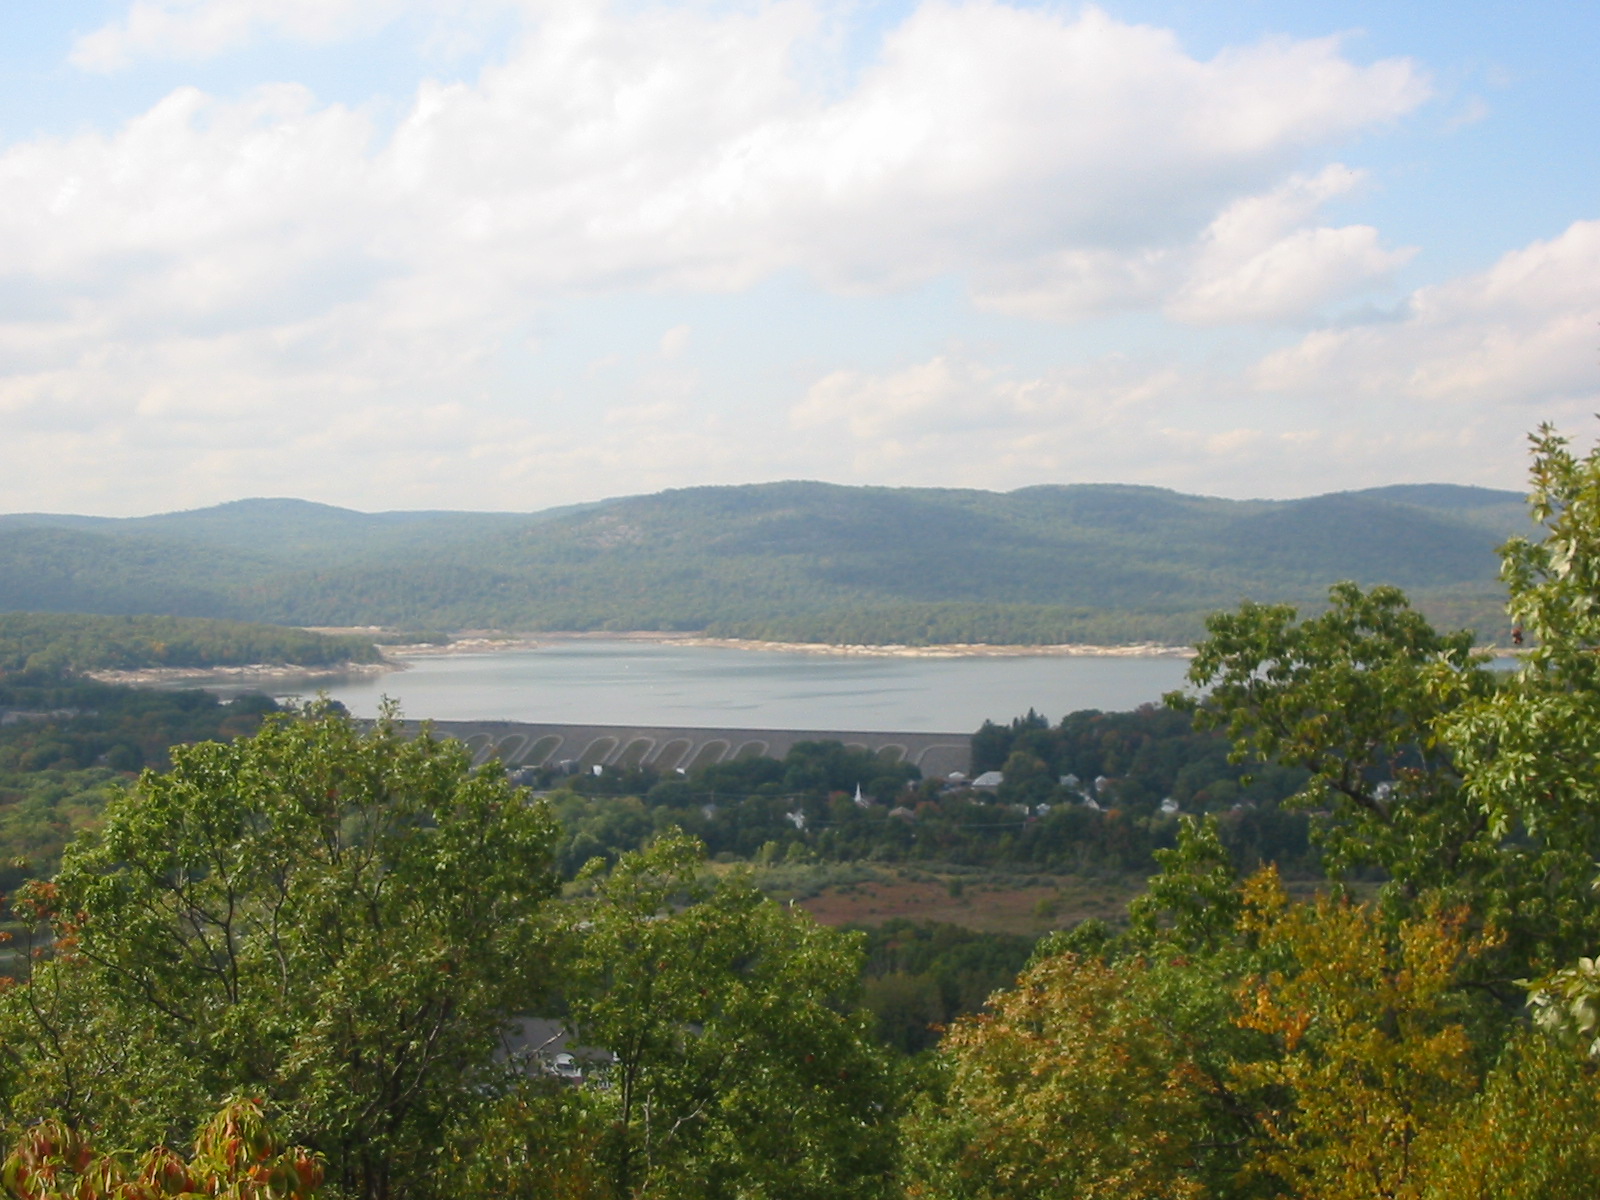 View of Wanaque Reservoir and the Wyanokies from the Wanaque Ridge Trail - Photo by Daniel Chazin